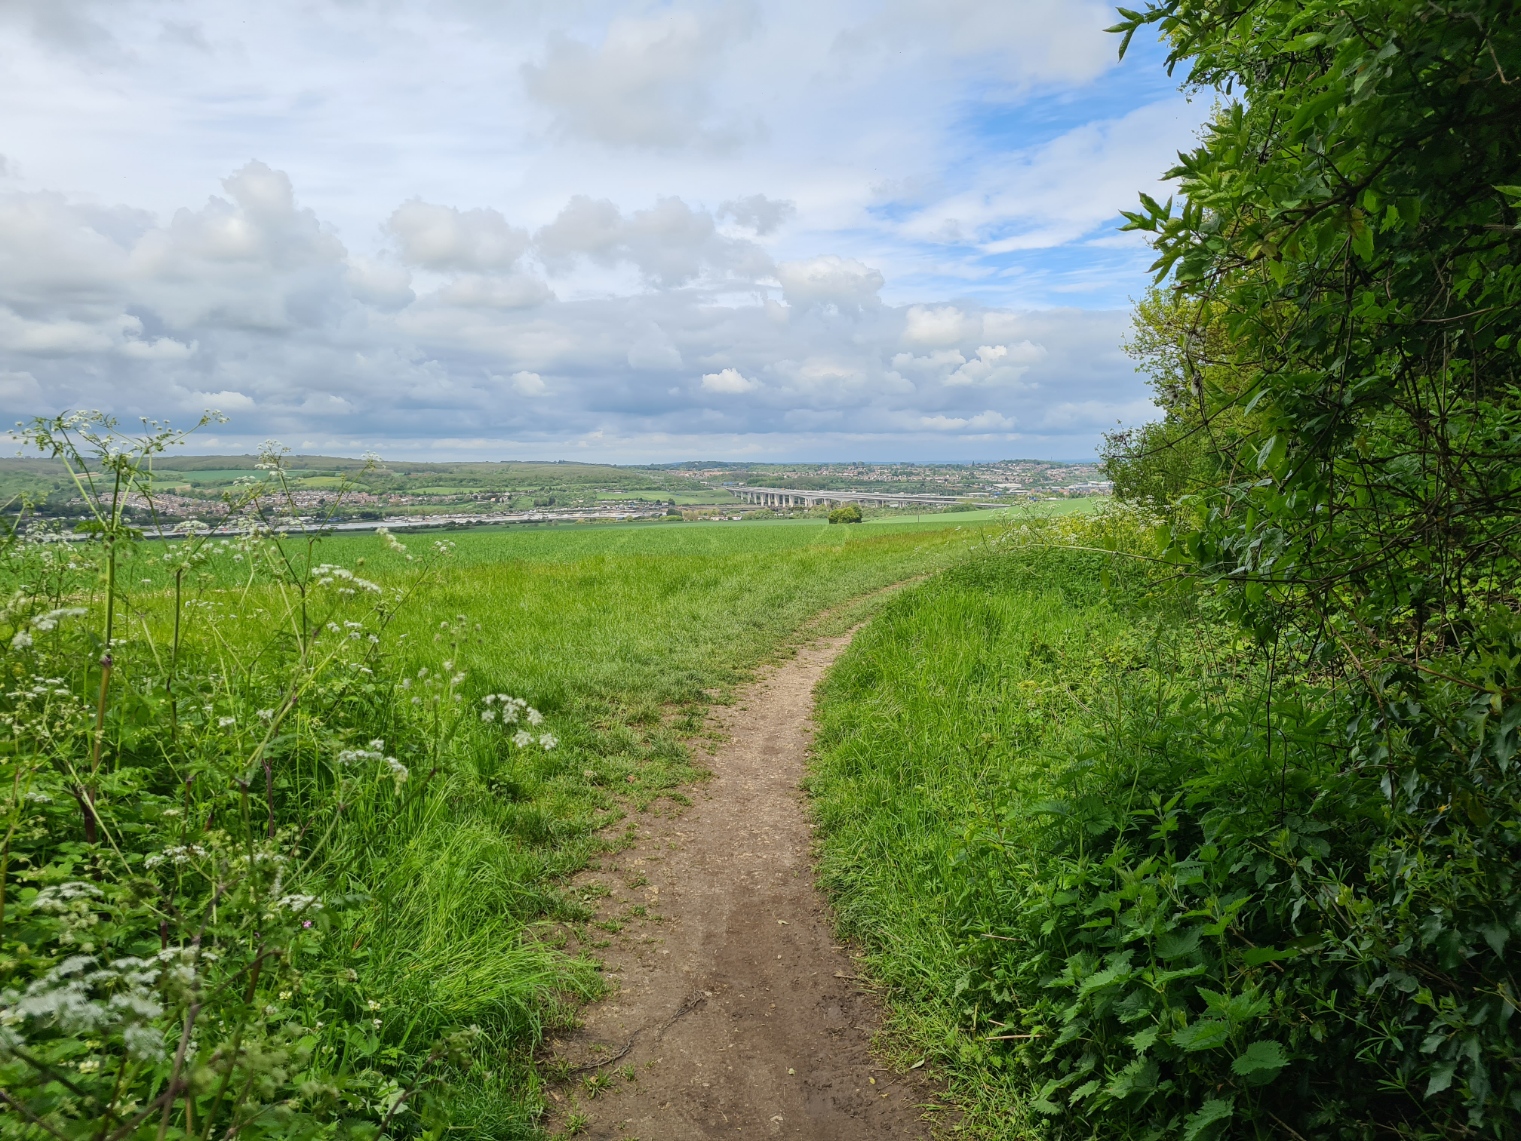 Emerging onto the North Downs Way presents a view over the Medway Towns and the modern concrete road and rail crossing over the river